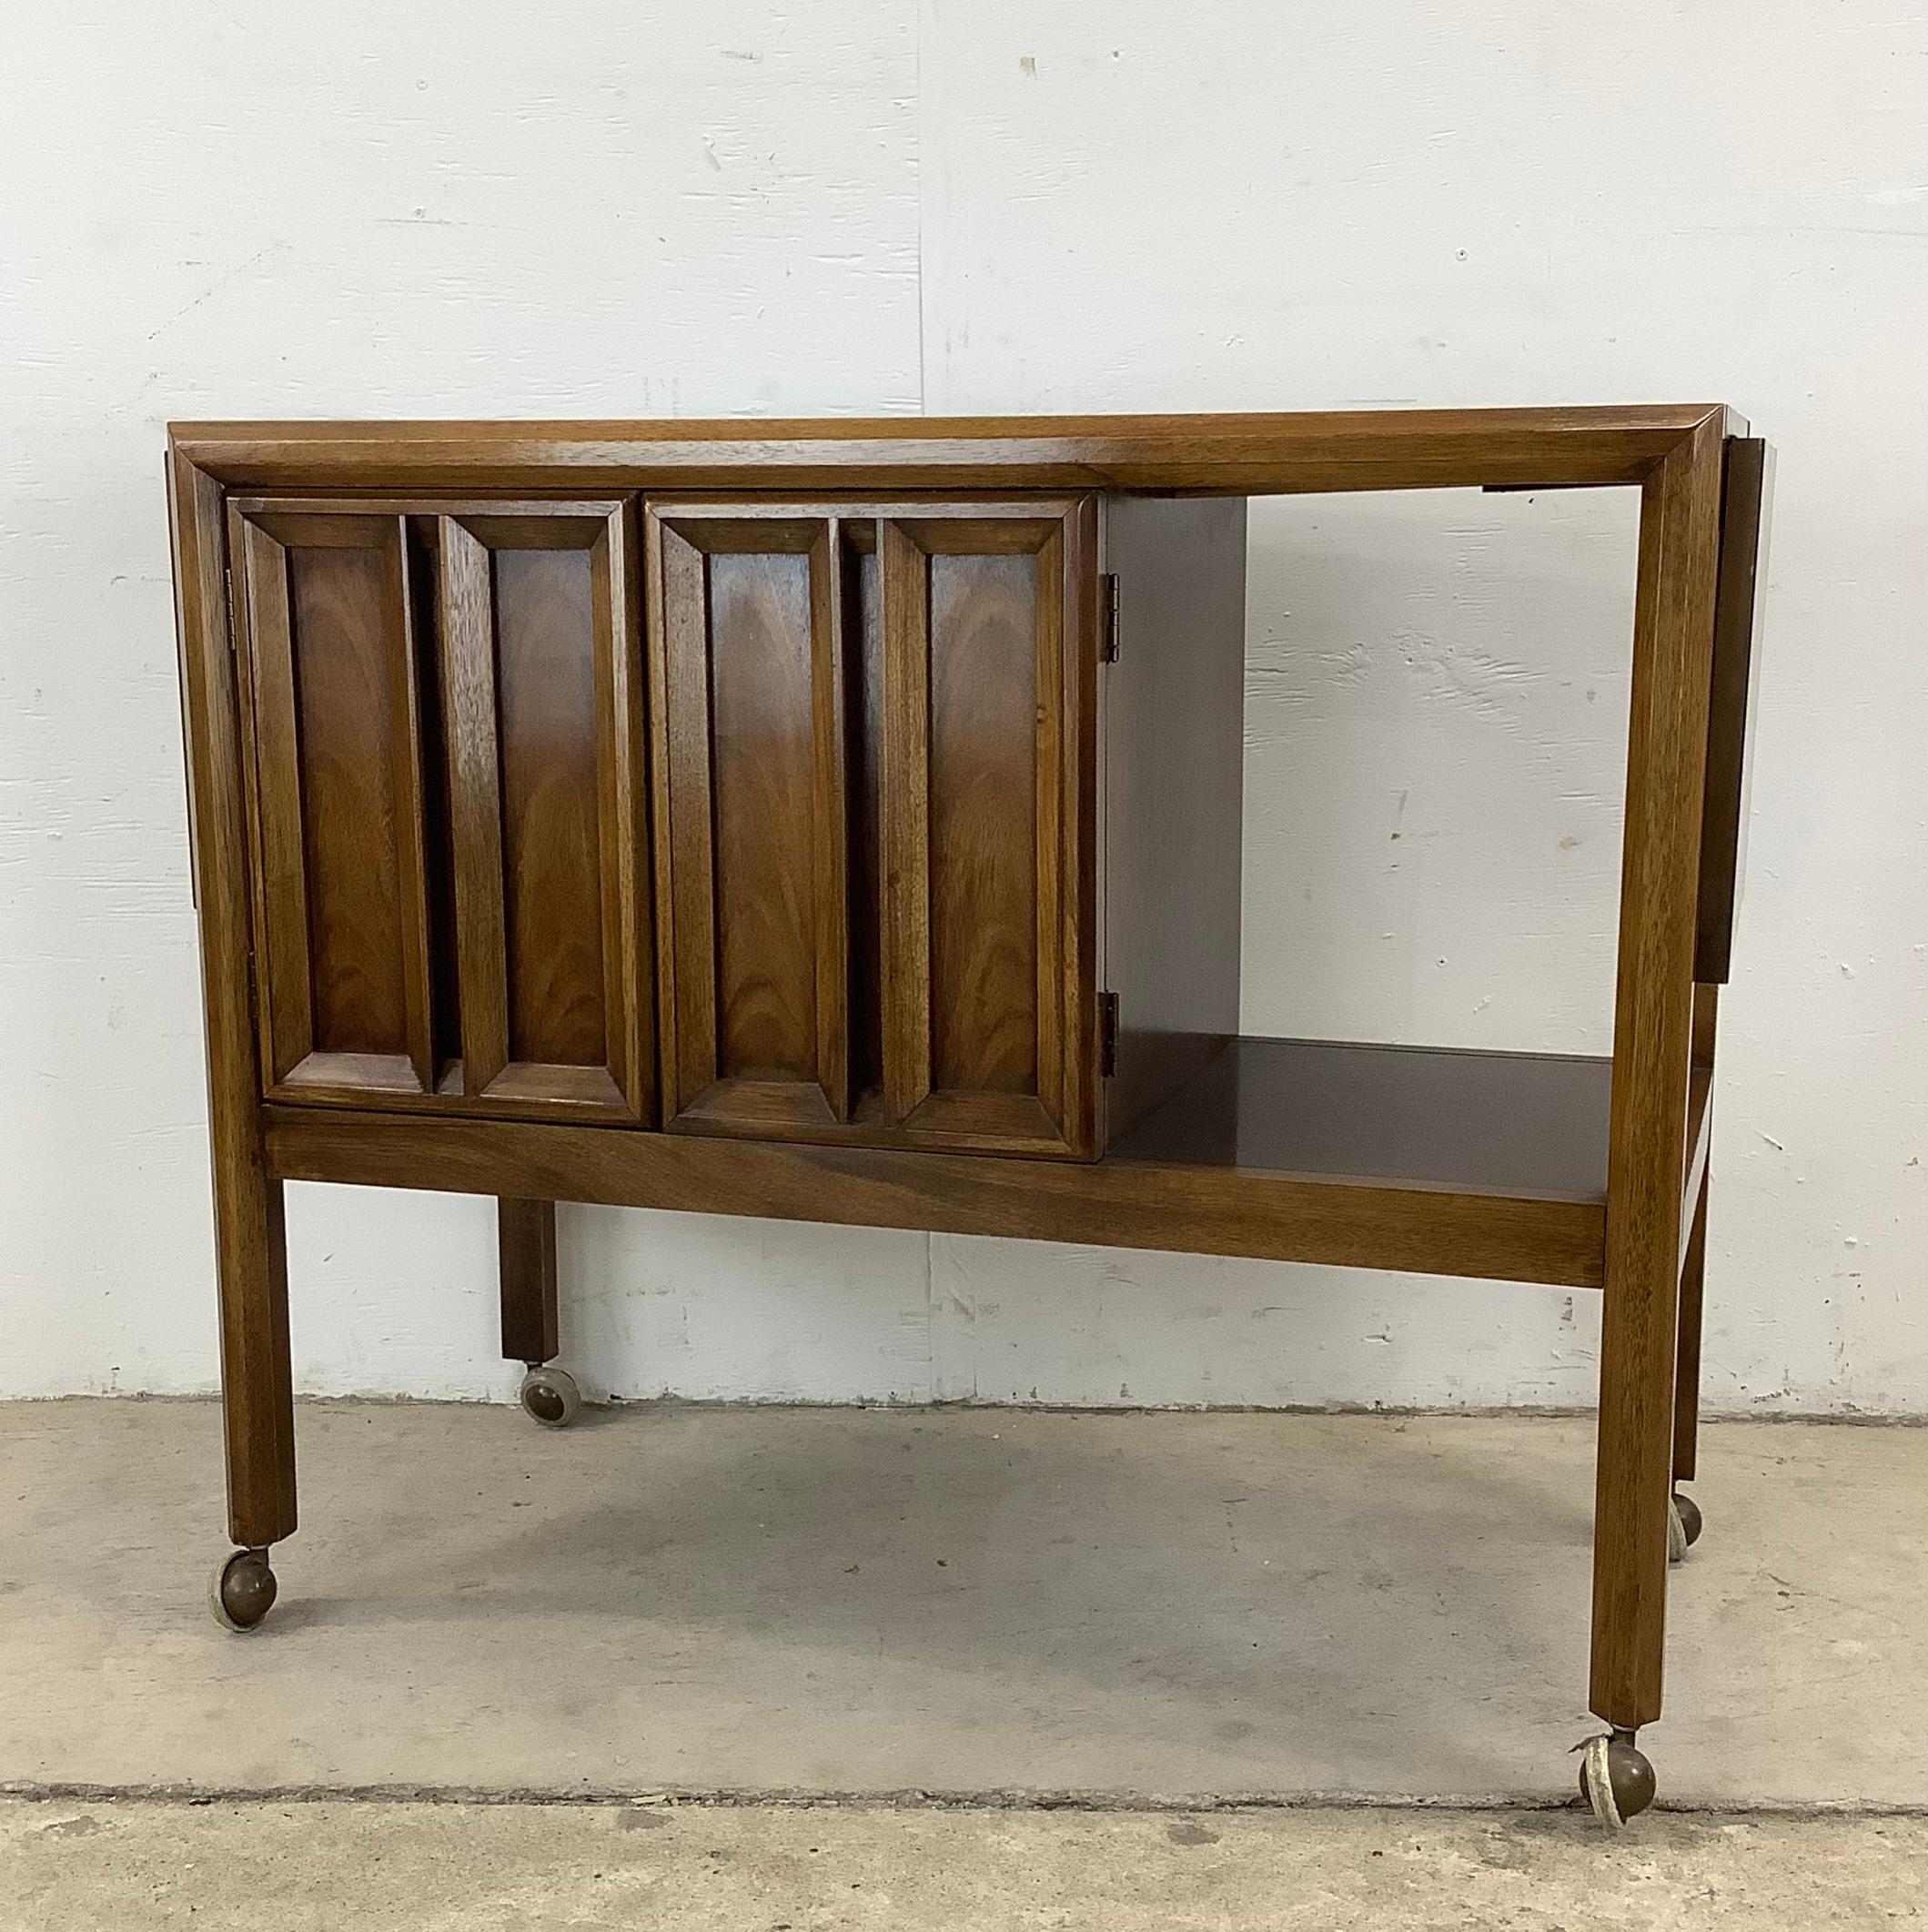 This Mid-Century Walnut Bar Cart is a stylish and versatile piece that's ready to elevate your style and service game to the next level. Combining versatile storage, display, and service options with a sleek mid-century aesthetic, it makes the